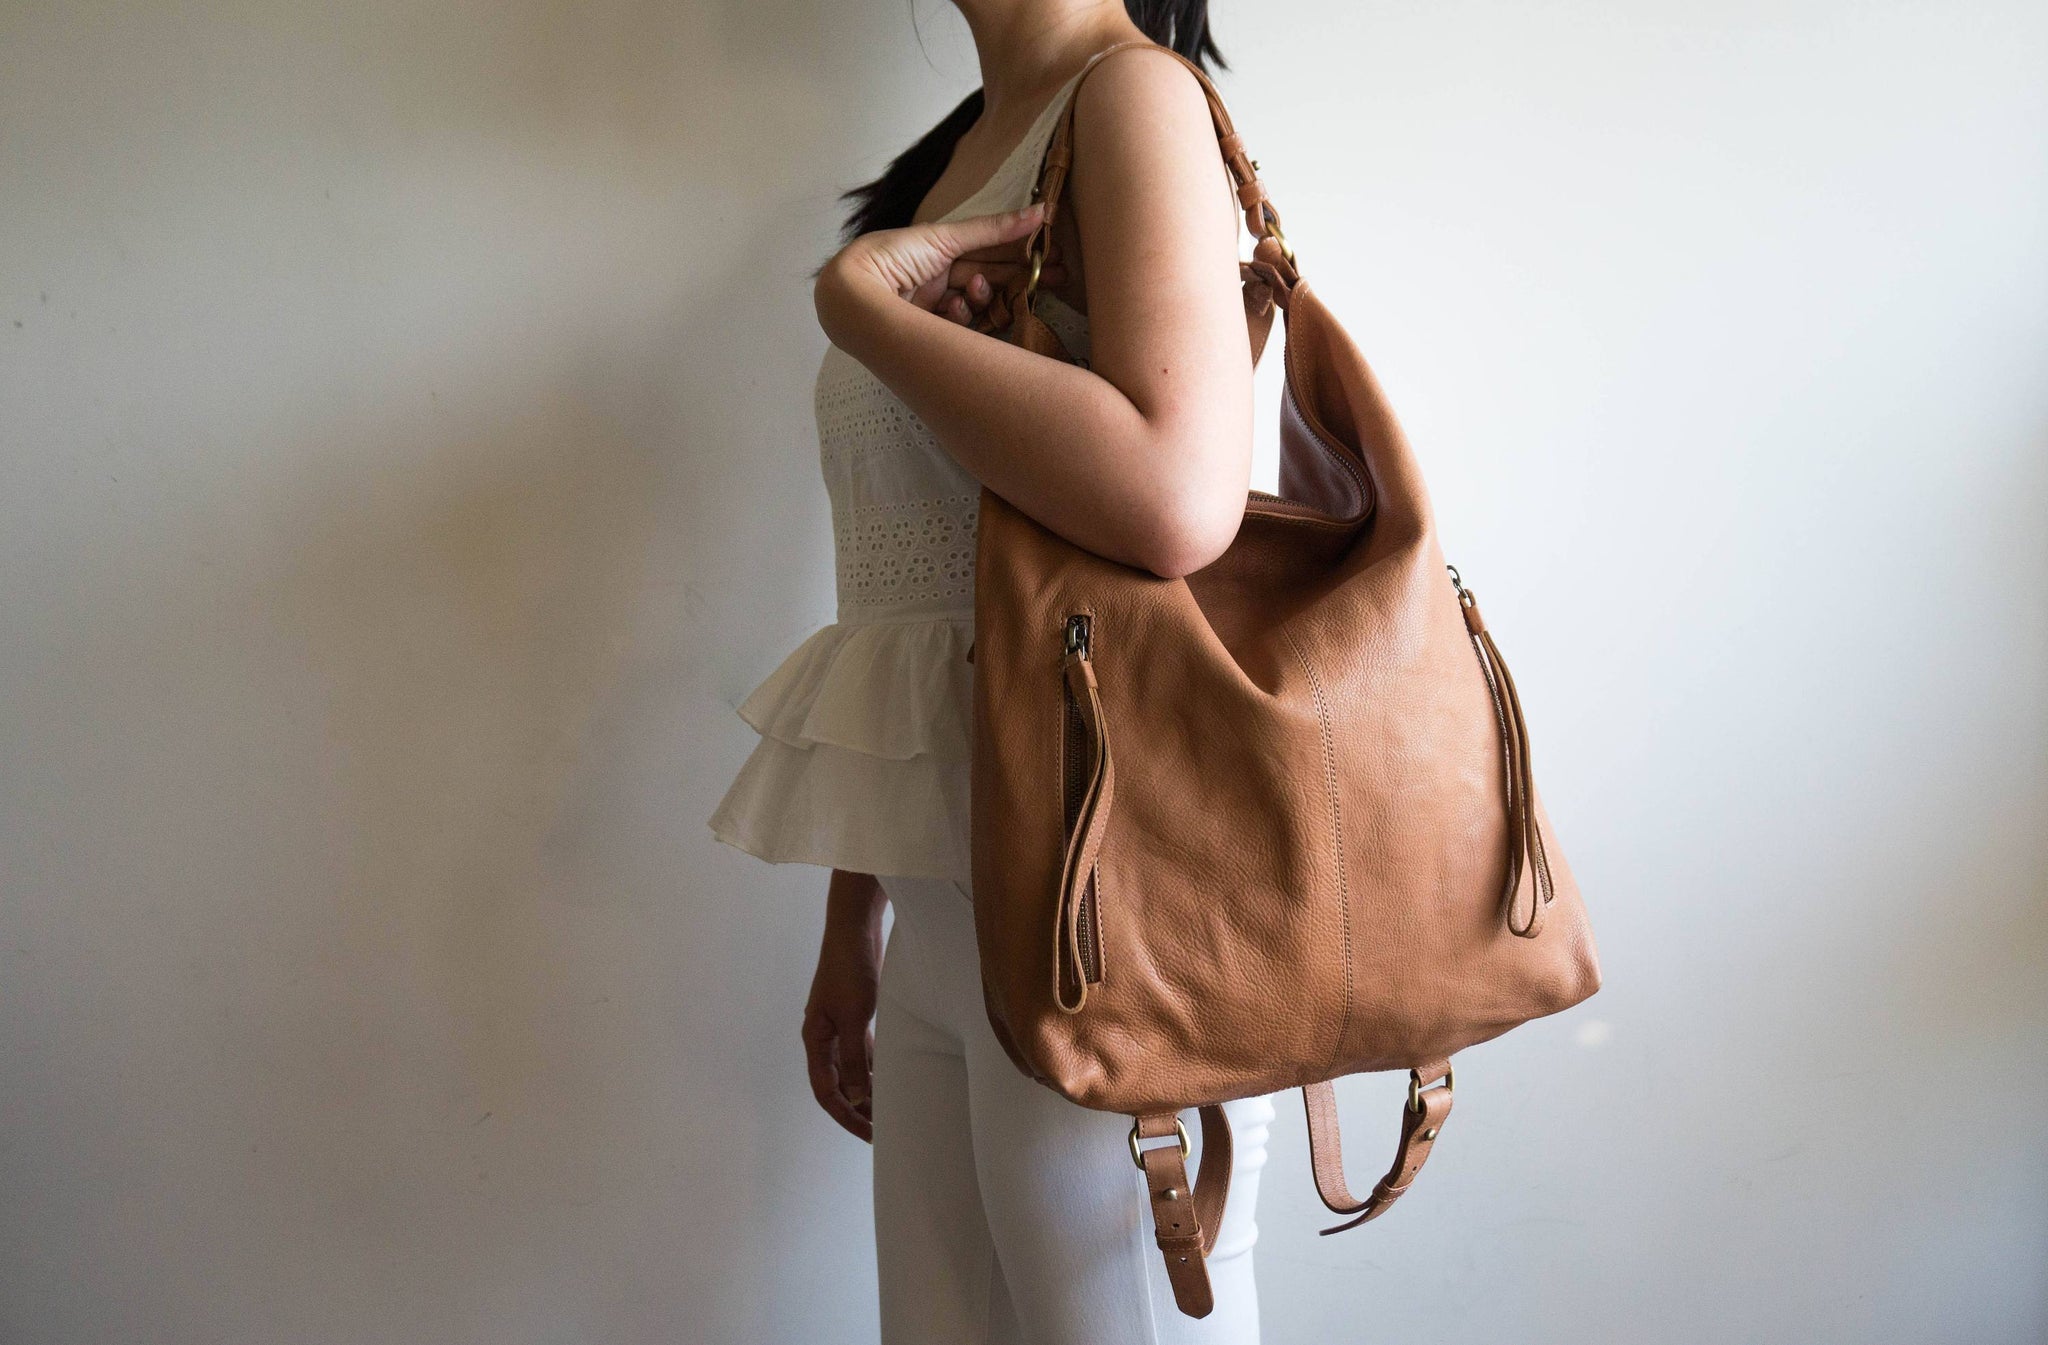 Small Tan Leather Hobo Bag - Slouchy Shoulder Purse